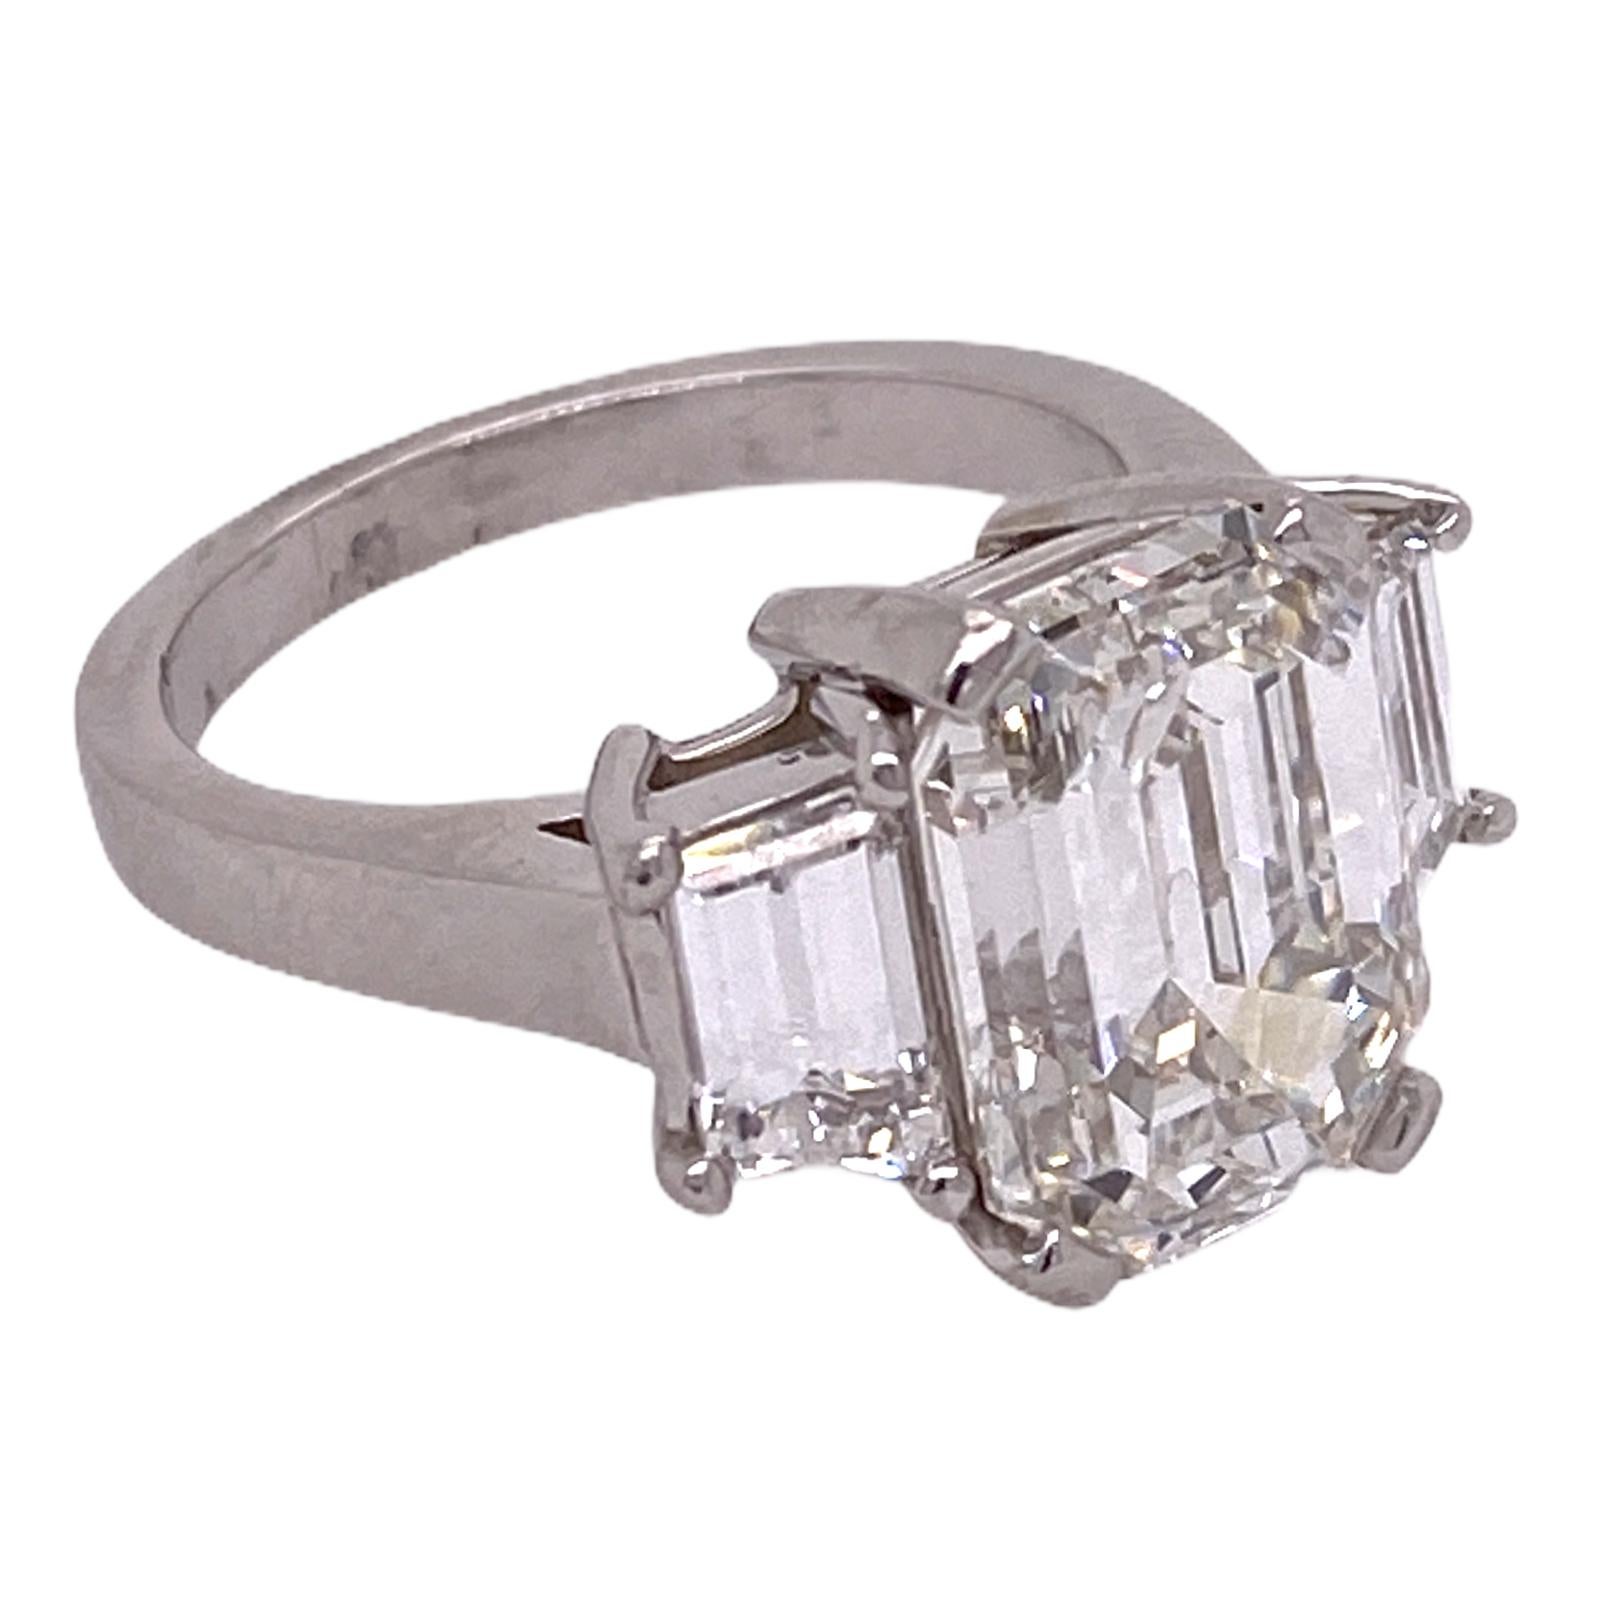 Stunning emerald cut diamond engagement ring handmade in platinum. The emerald cut diamond weighs 5.28 carats and is graded H color and VS2 clarity by the GIA. The two side trapazoid cut diamonds weigh 1.00 carat total weight. The platinum mounting